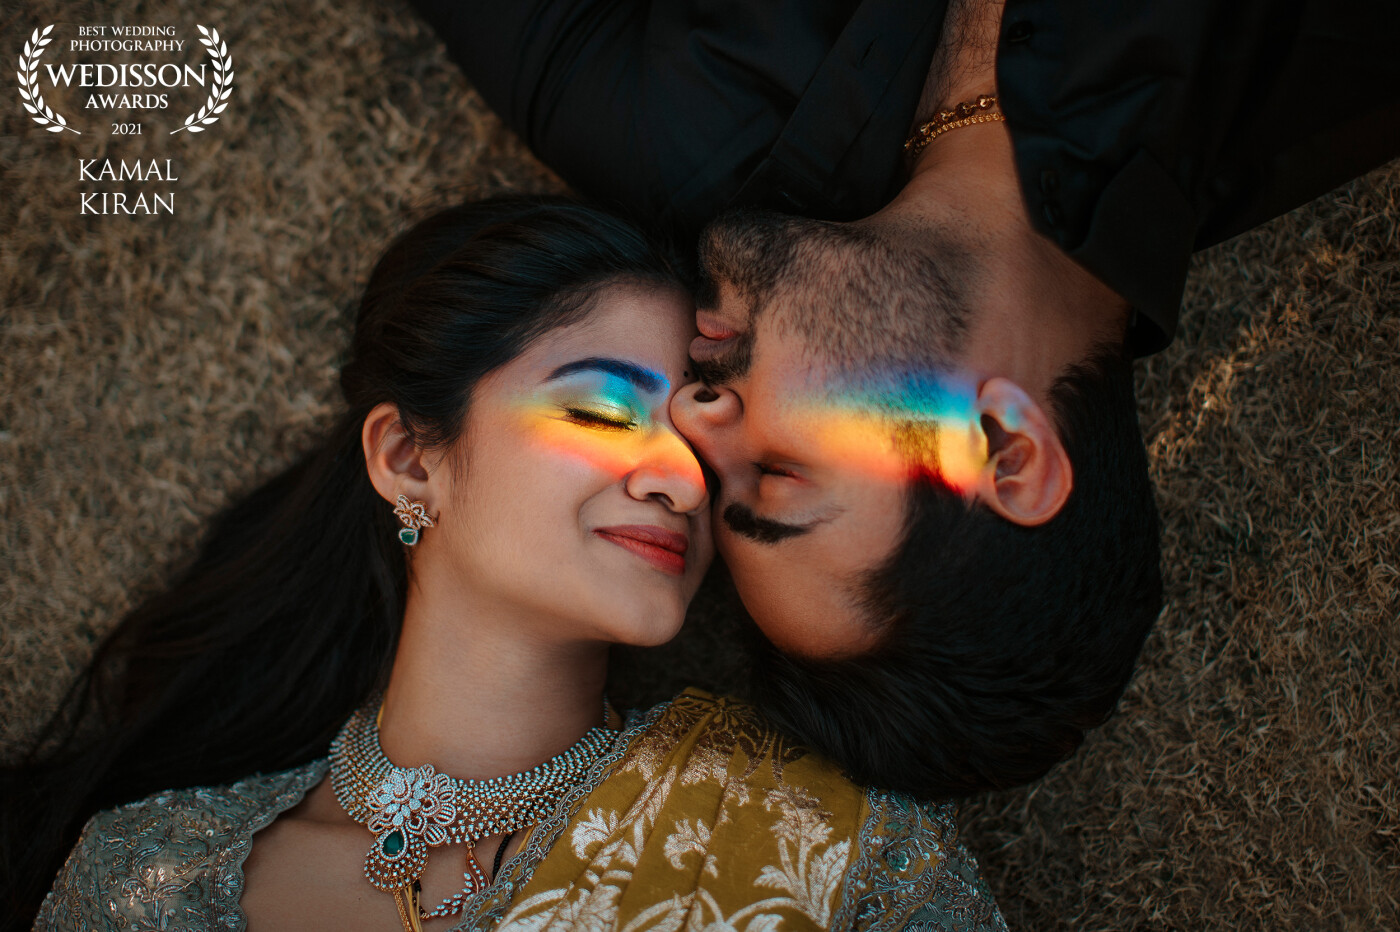 Painting rainbows into love stories. The art of romance is in creating rainbows and butterflies, molding two people into one enigmatic, epic picture.